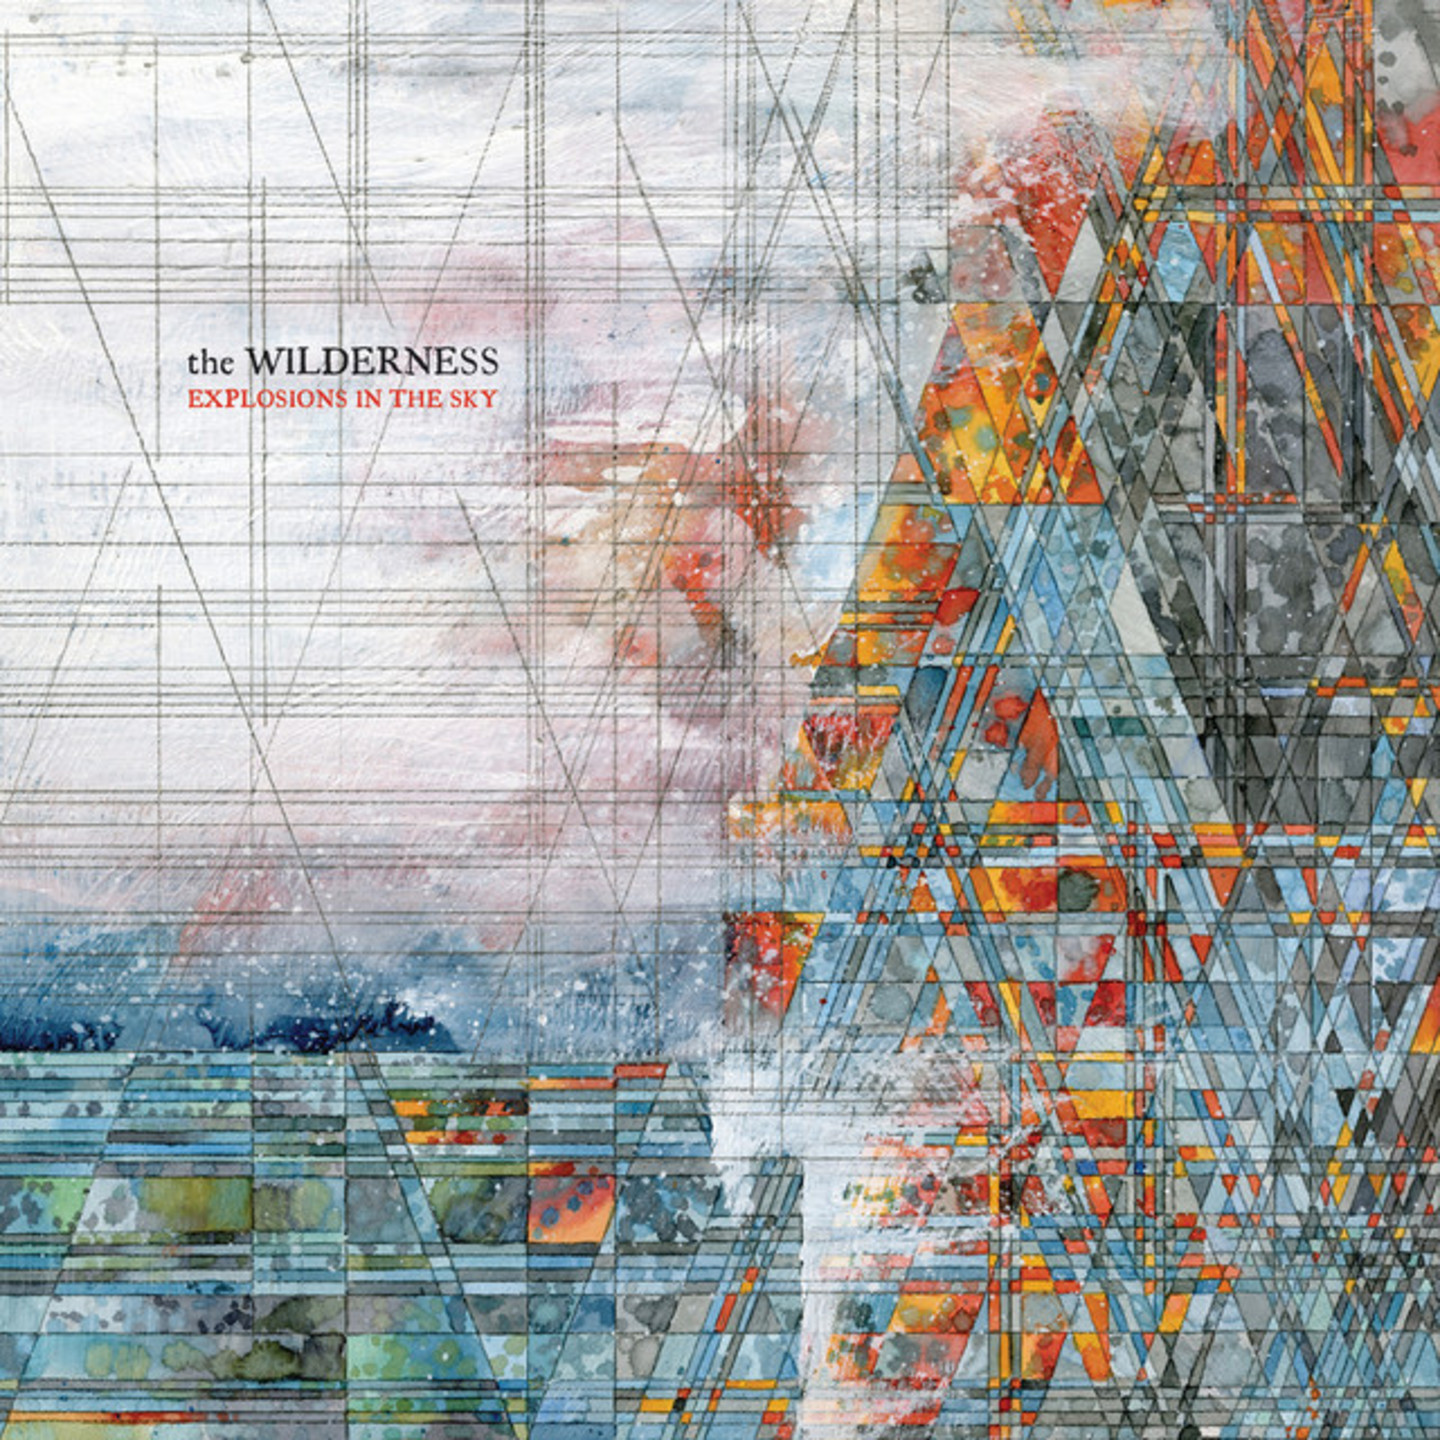 EXPLOSIONS IN THE SKY - The Wilderness 2xLP